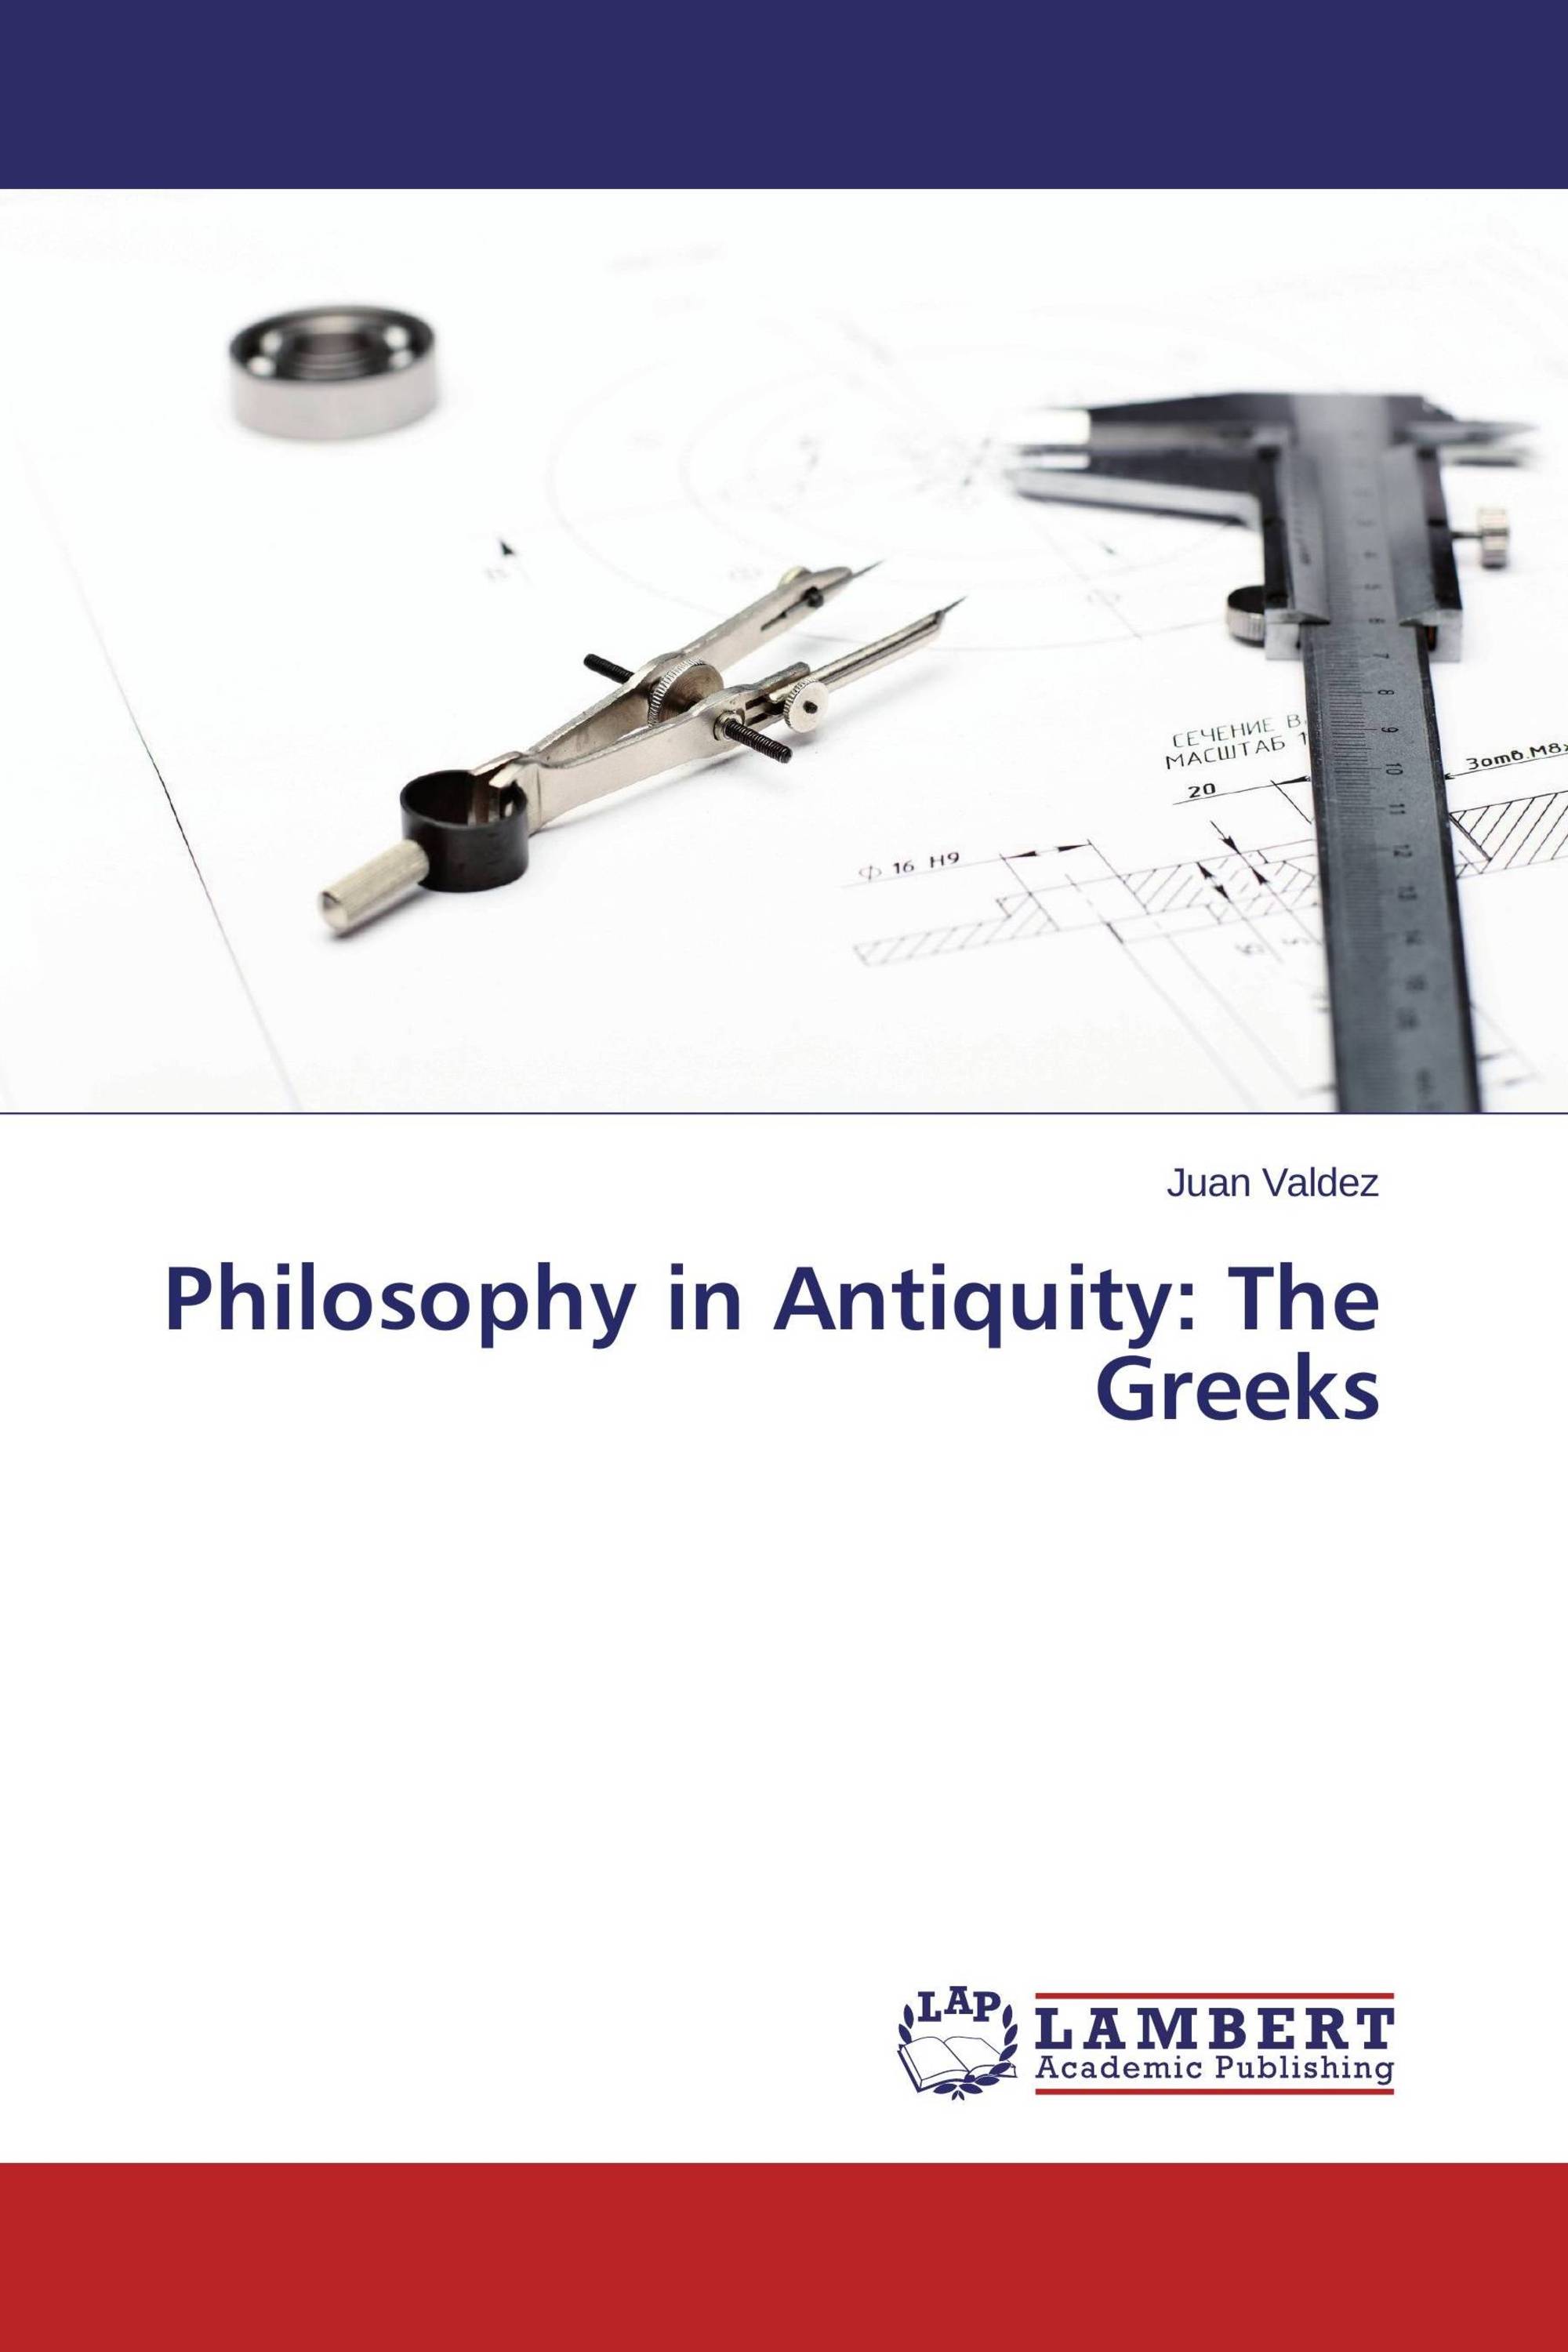 Philosophy in Antiquity: The Greeks